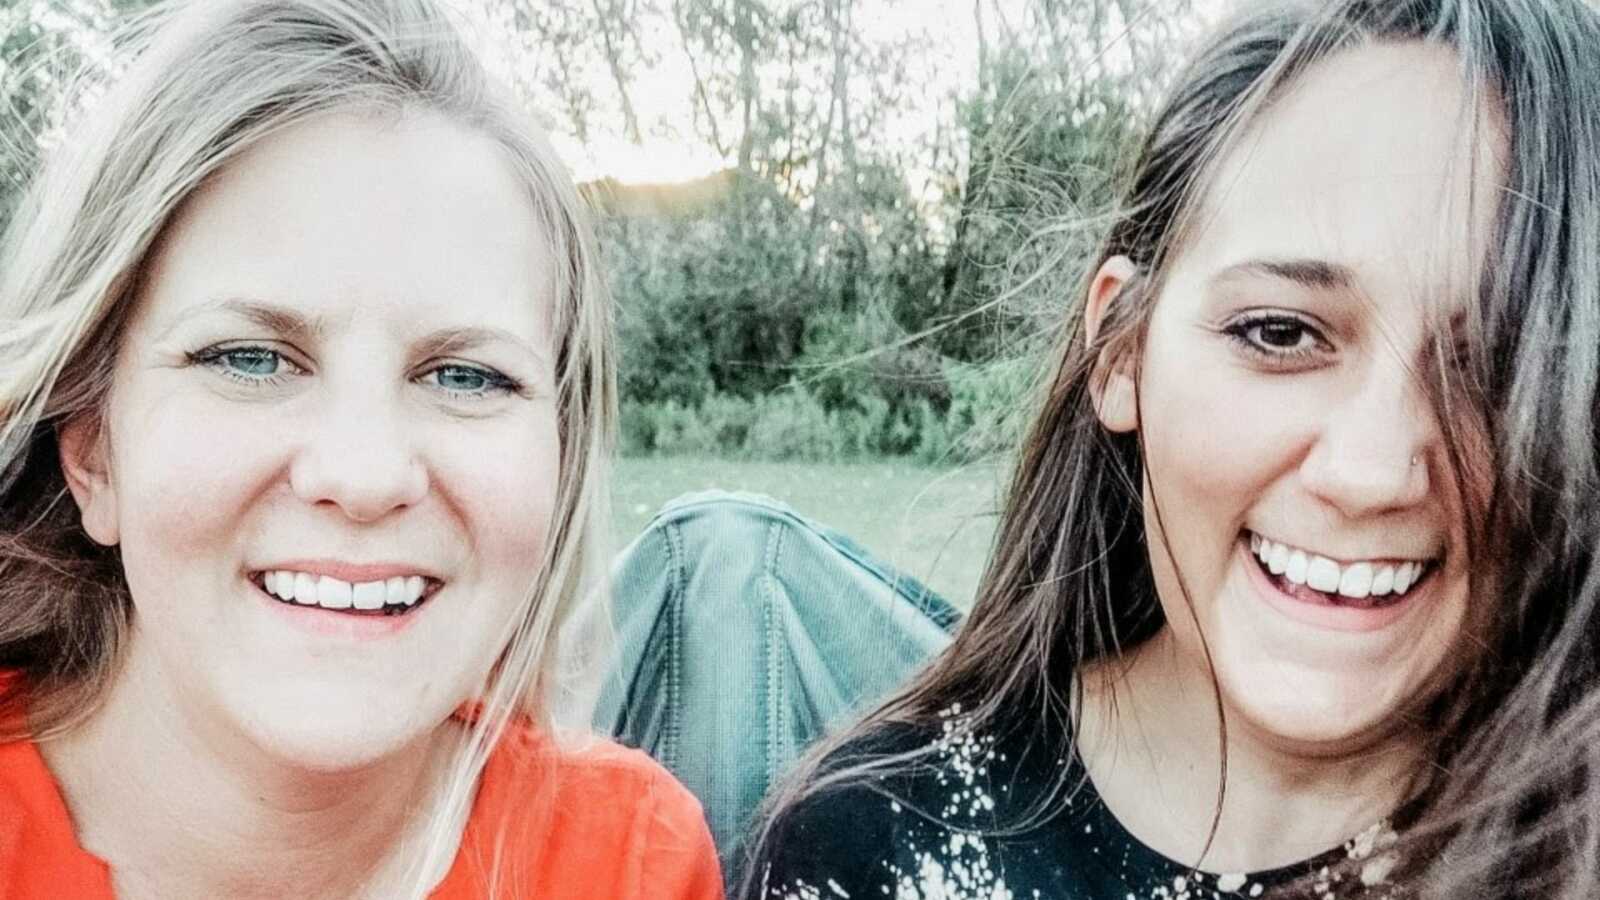 Mom and stepmom giggle together while taking selfies at one of their kids' football games